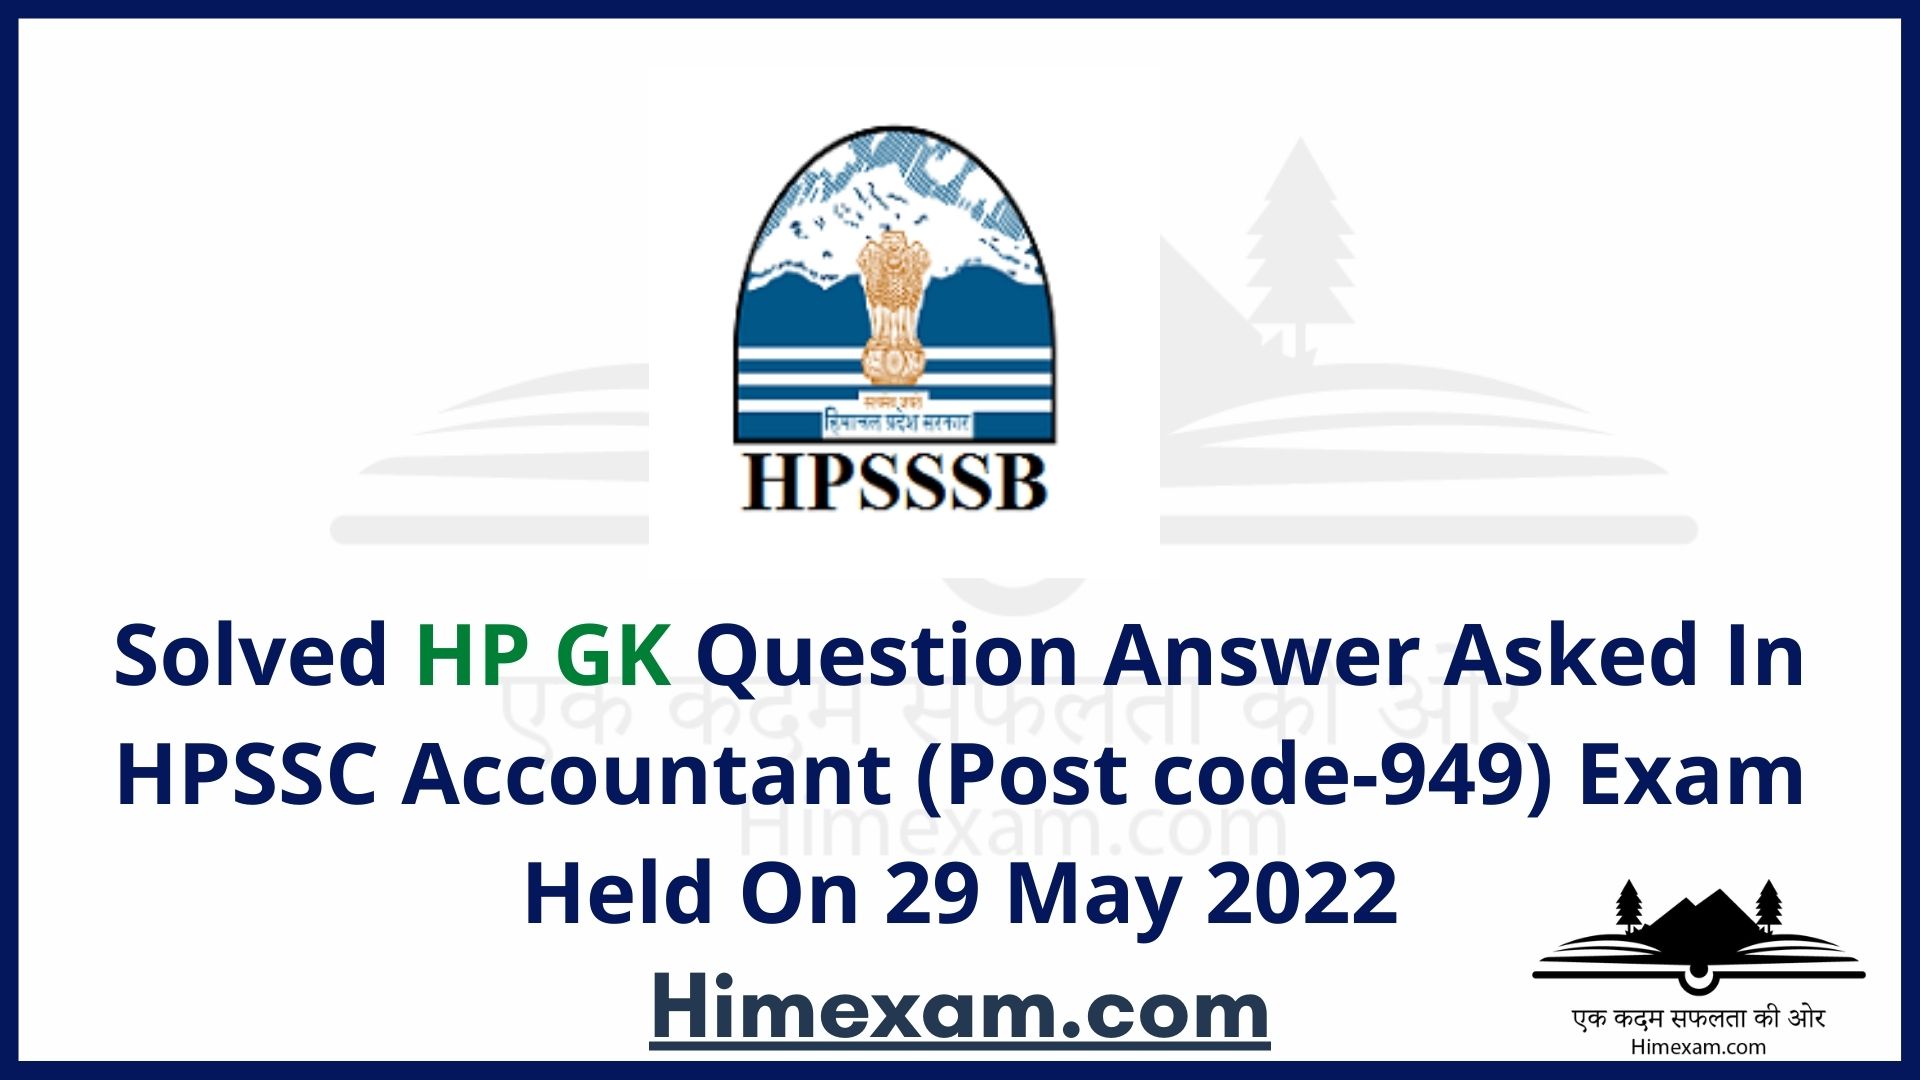 Solved HP GK Question Answer Asked In HPSSC Accountant (Post code-949) Exam Held On 29 May 2022